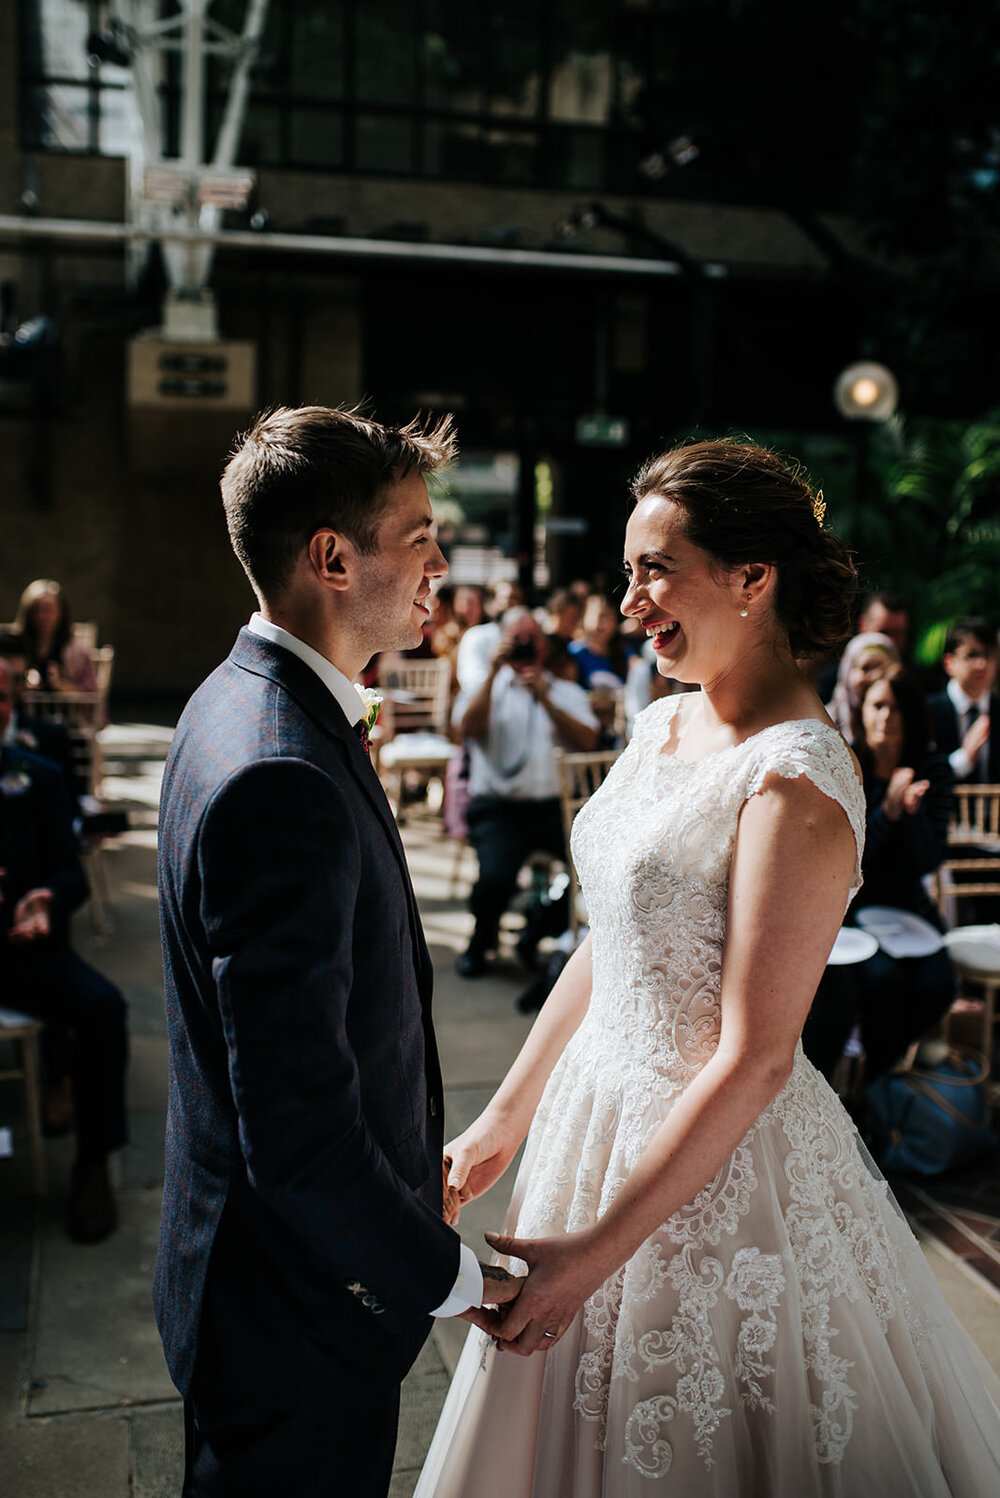 Bride and groom hold hands and look at each other passionately seconds after sharing first kiss at Barbican Centre wedding in London